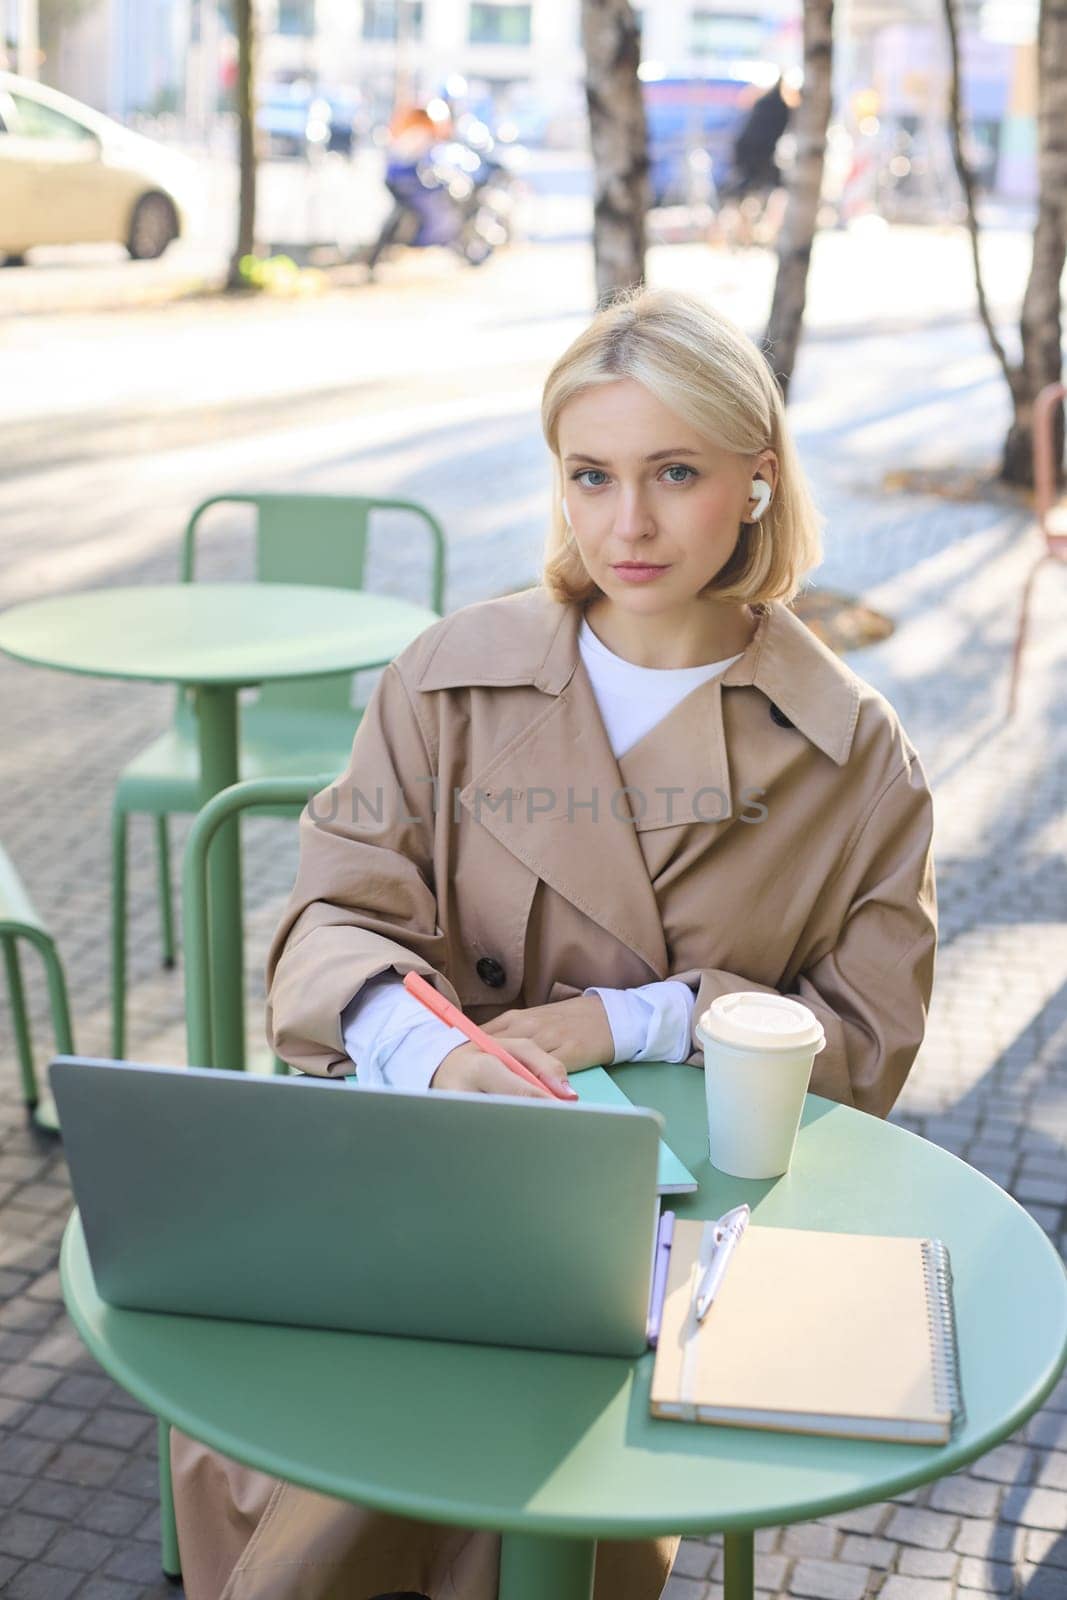 Vertical shot of young blond woman in wireless headphones, making notes, studying online, attend web lecture, using laptop, writing in notebook, looking serious at camera.